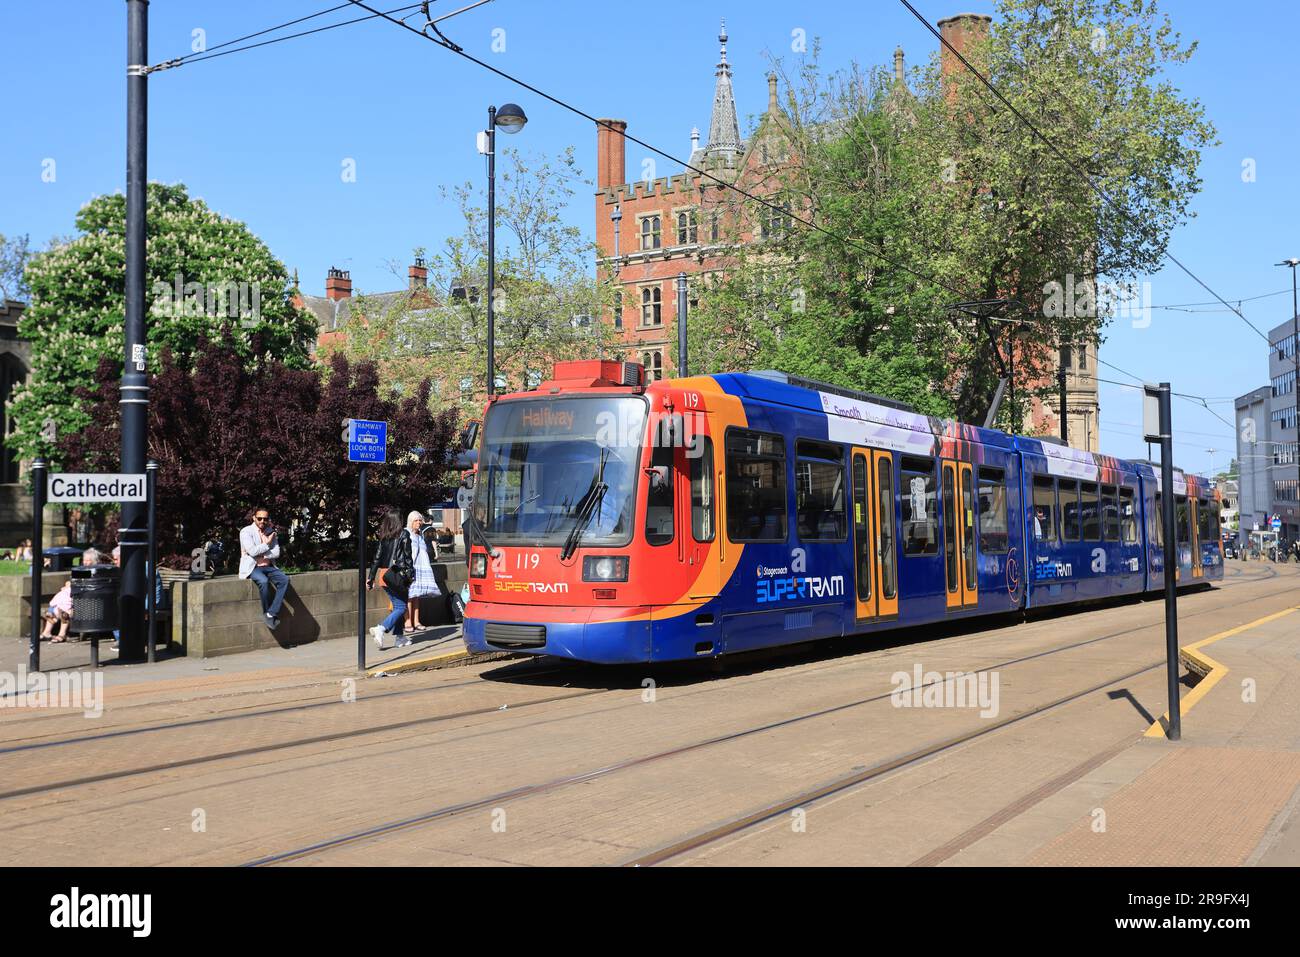 The Sheffield Supertram at the Cathedral stop in the city, part of a network covering Sheffield & Rotherham, South Yorkshire, UK Stock Photo